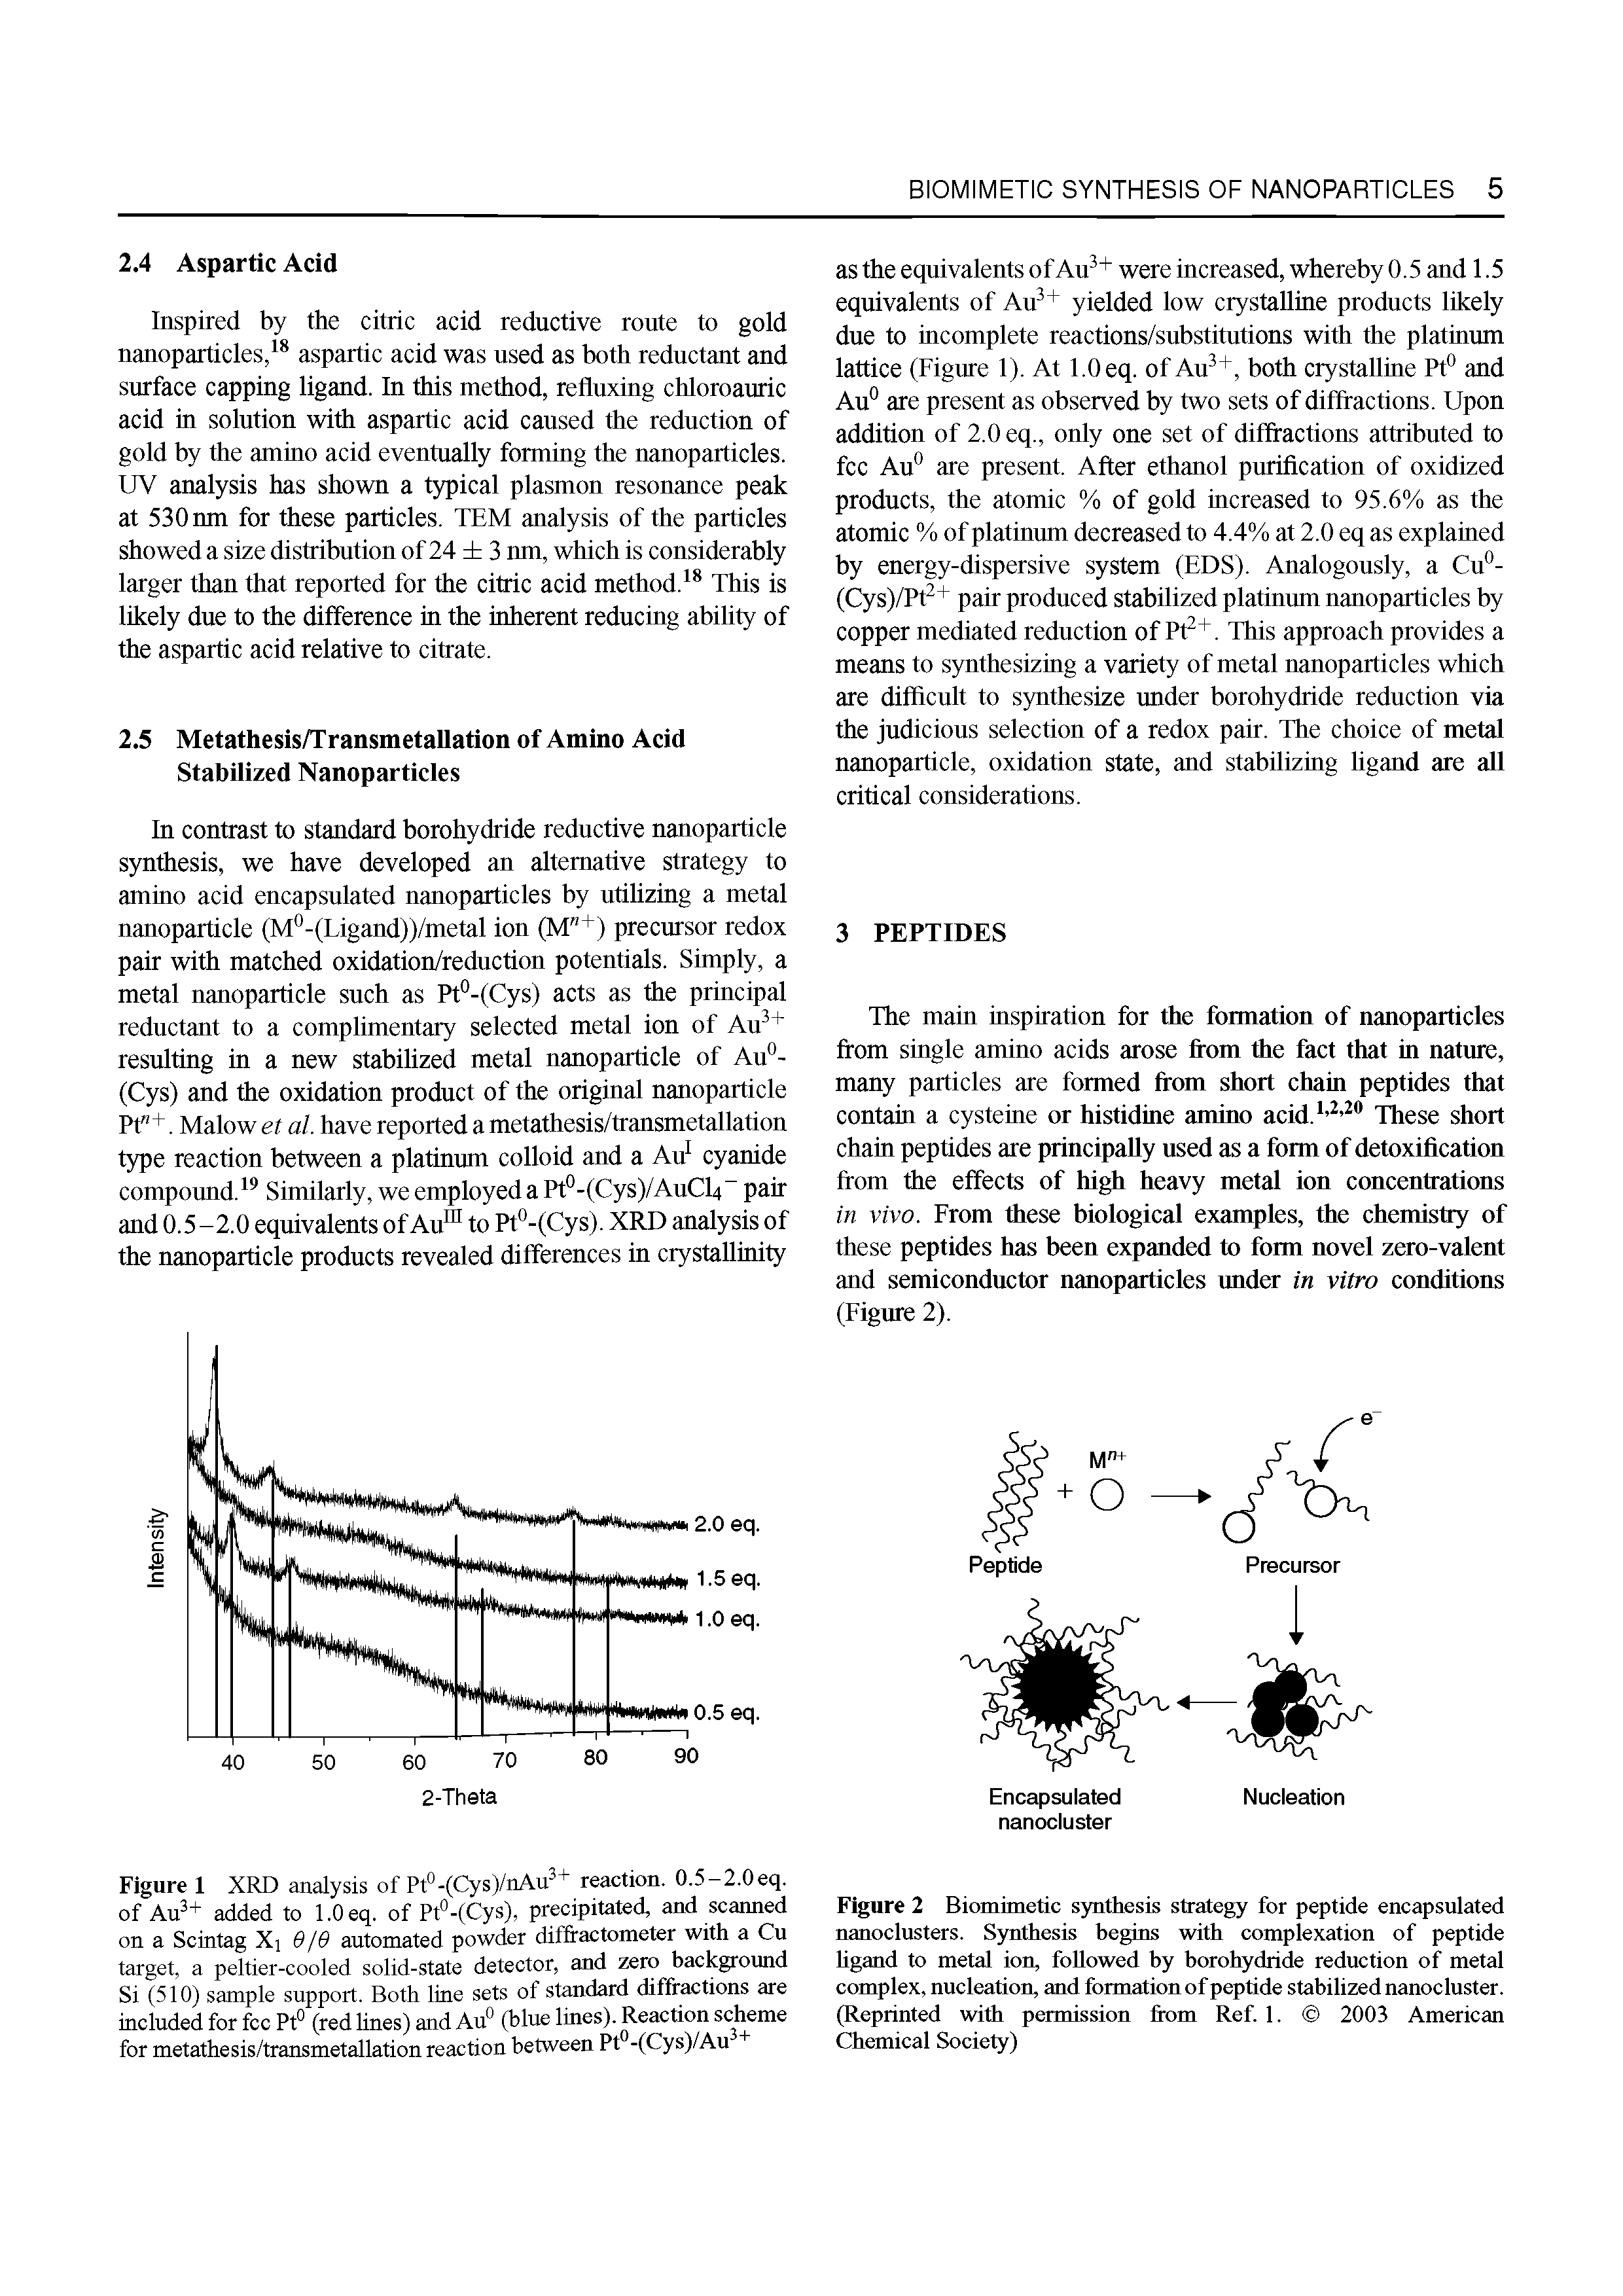 Figure 2 Biomimetic synthesis strategy for peptide encapsulated nanoclusters. Synthesis begins with complexation of peptide hgand to metal ion, followed by borohydride reduction of metal complex, nucleation, and formation of peptide stabilized nanocluster. (Reprinted with permission from Ref. 1. 2003 American Chemical Society)...